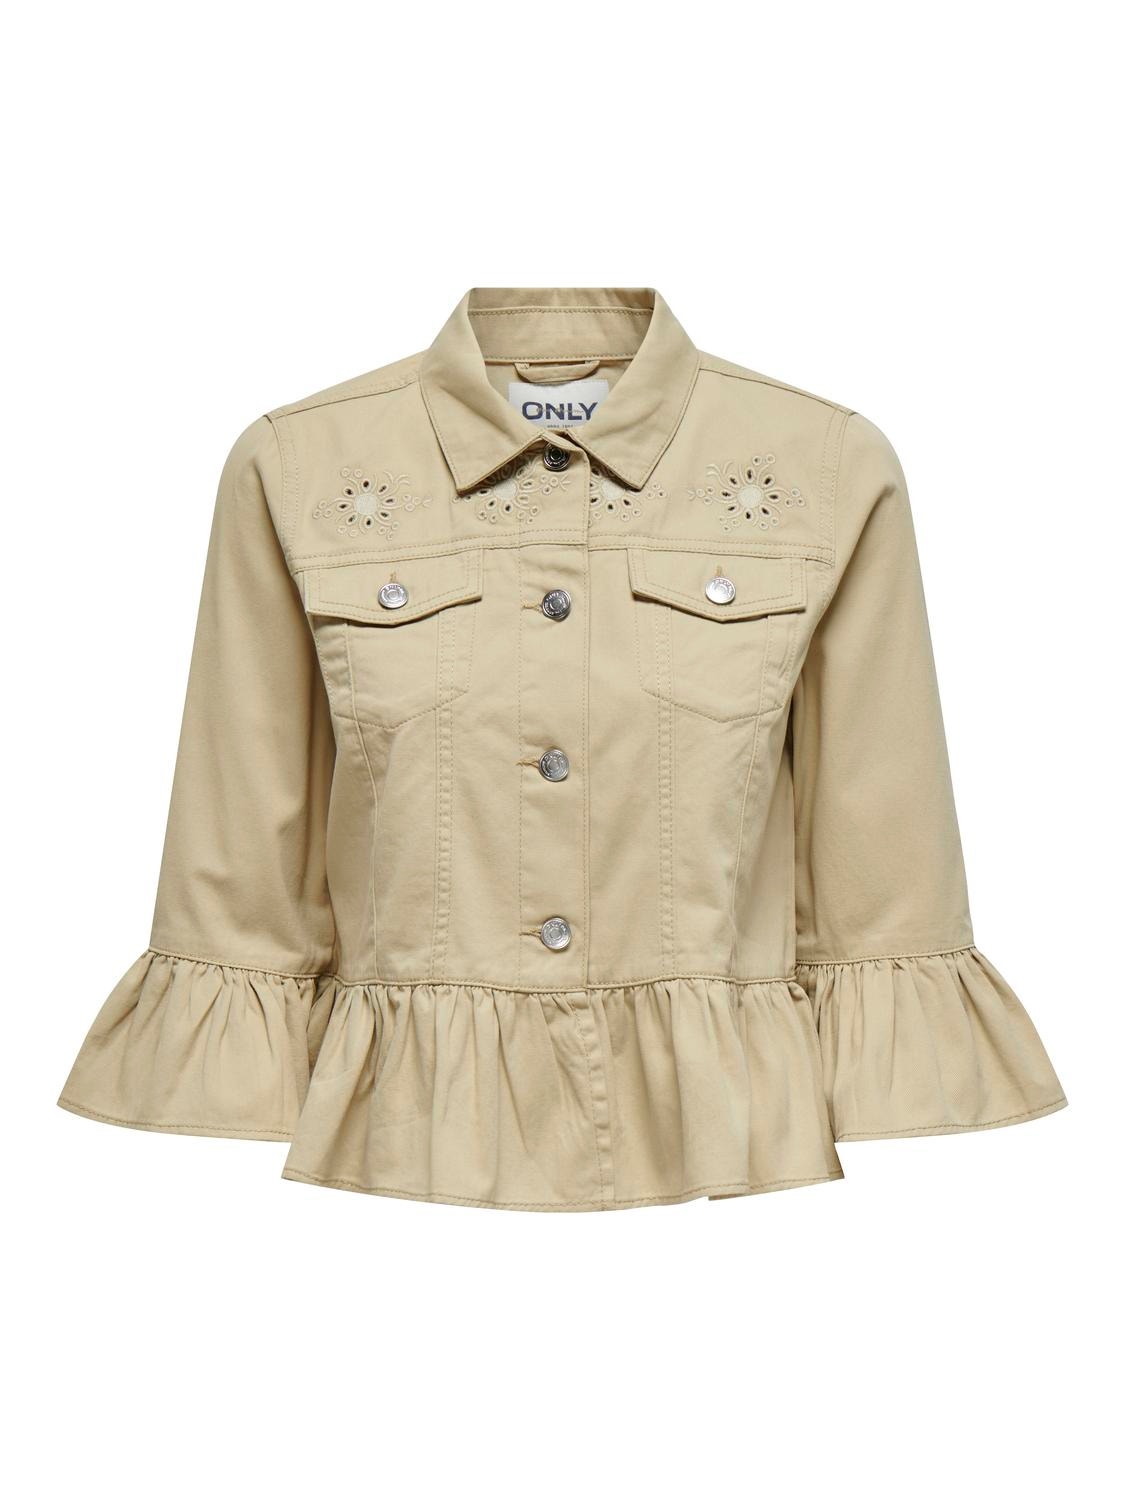 ONLY Spread collar Jacket -Pale Khaki - 15314650